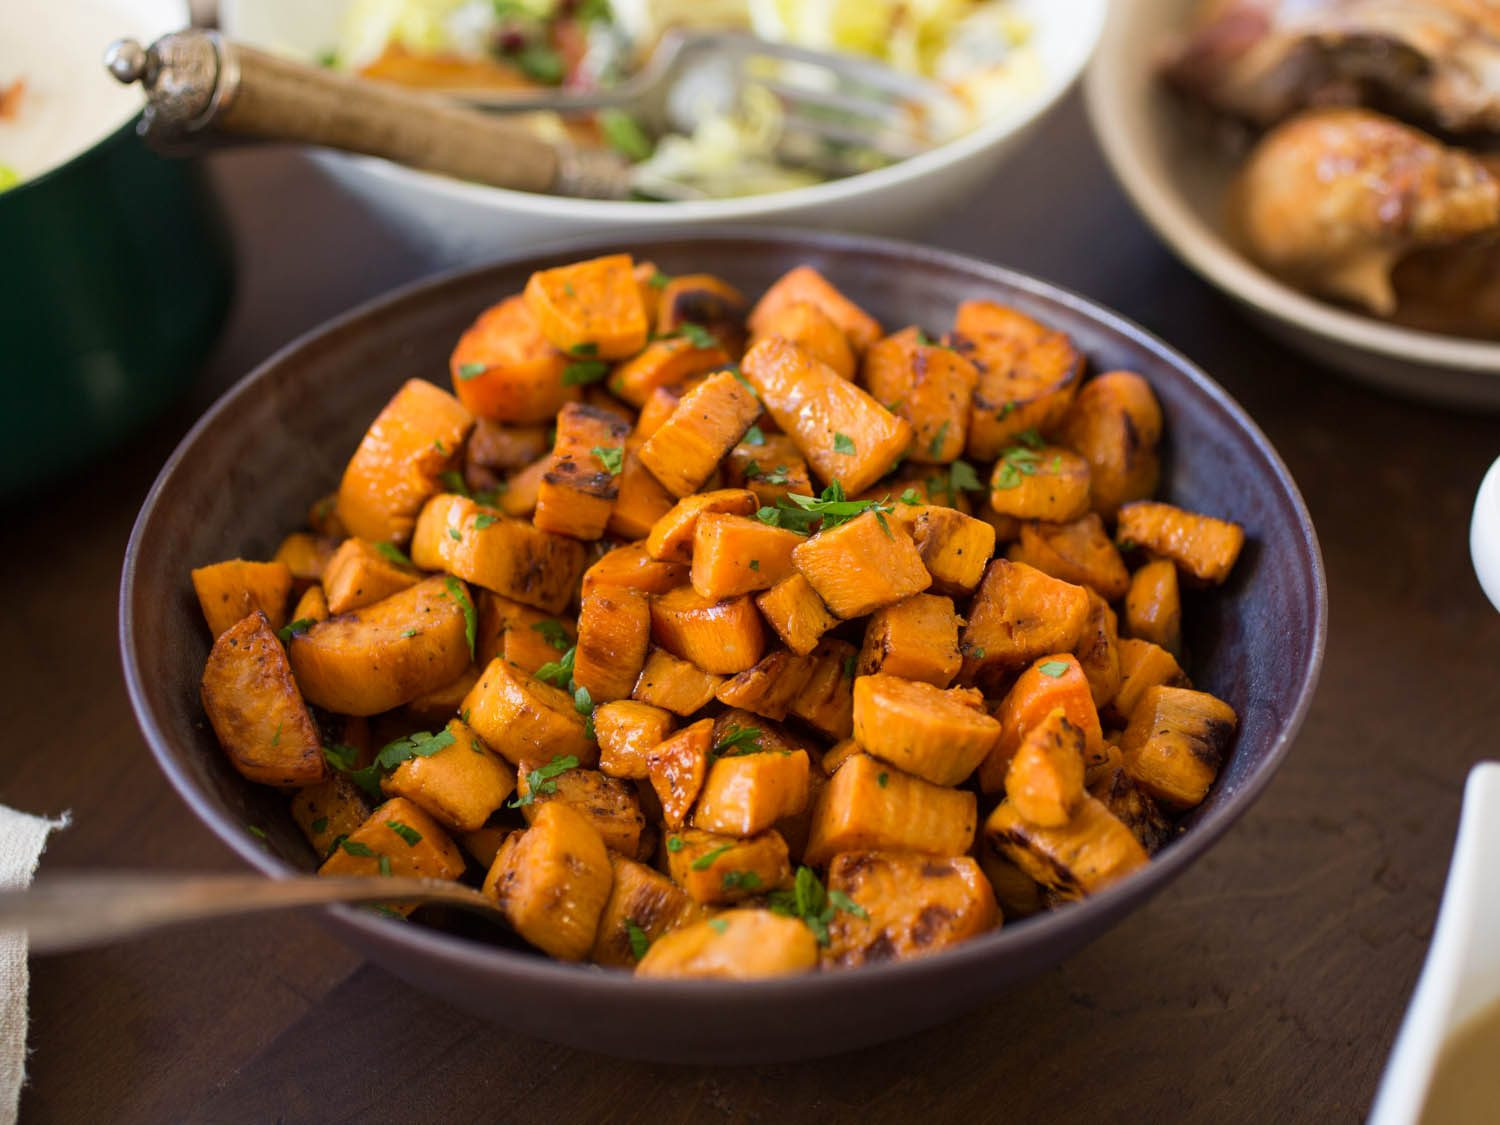 Thanksgiving Roasted Sweet Potatoes
 The Best Roasted Sweet Potatoes Recipe